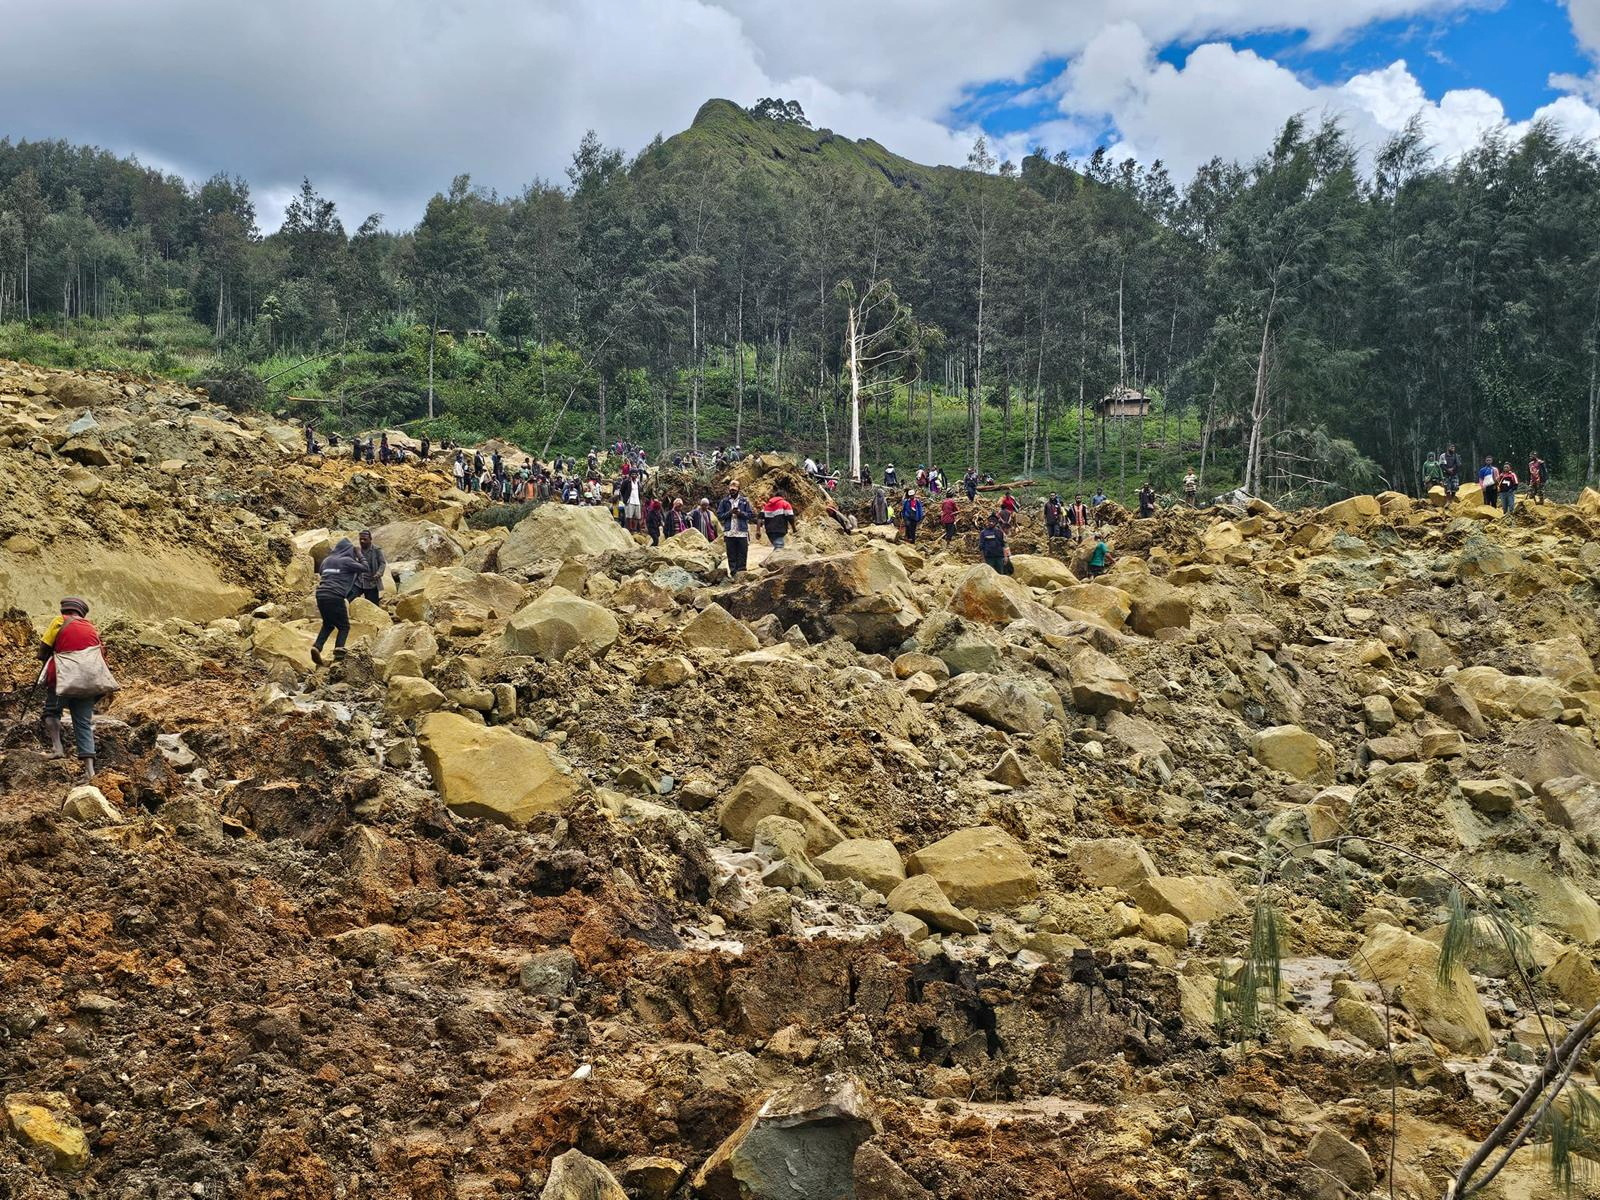 image More than 300 buried in Papua New Guinea landslide, local media says